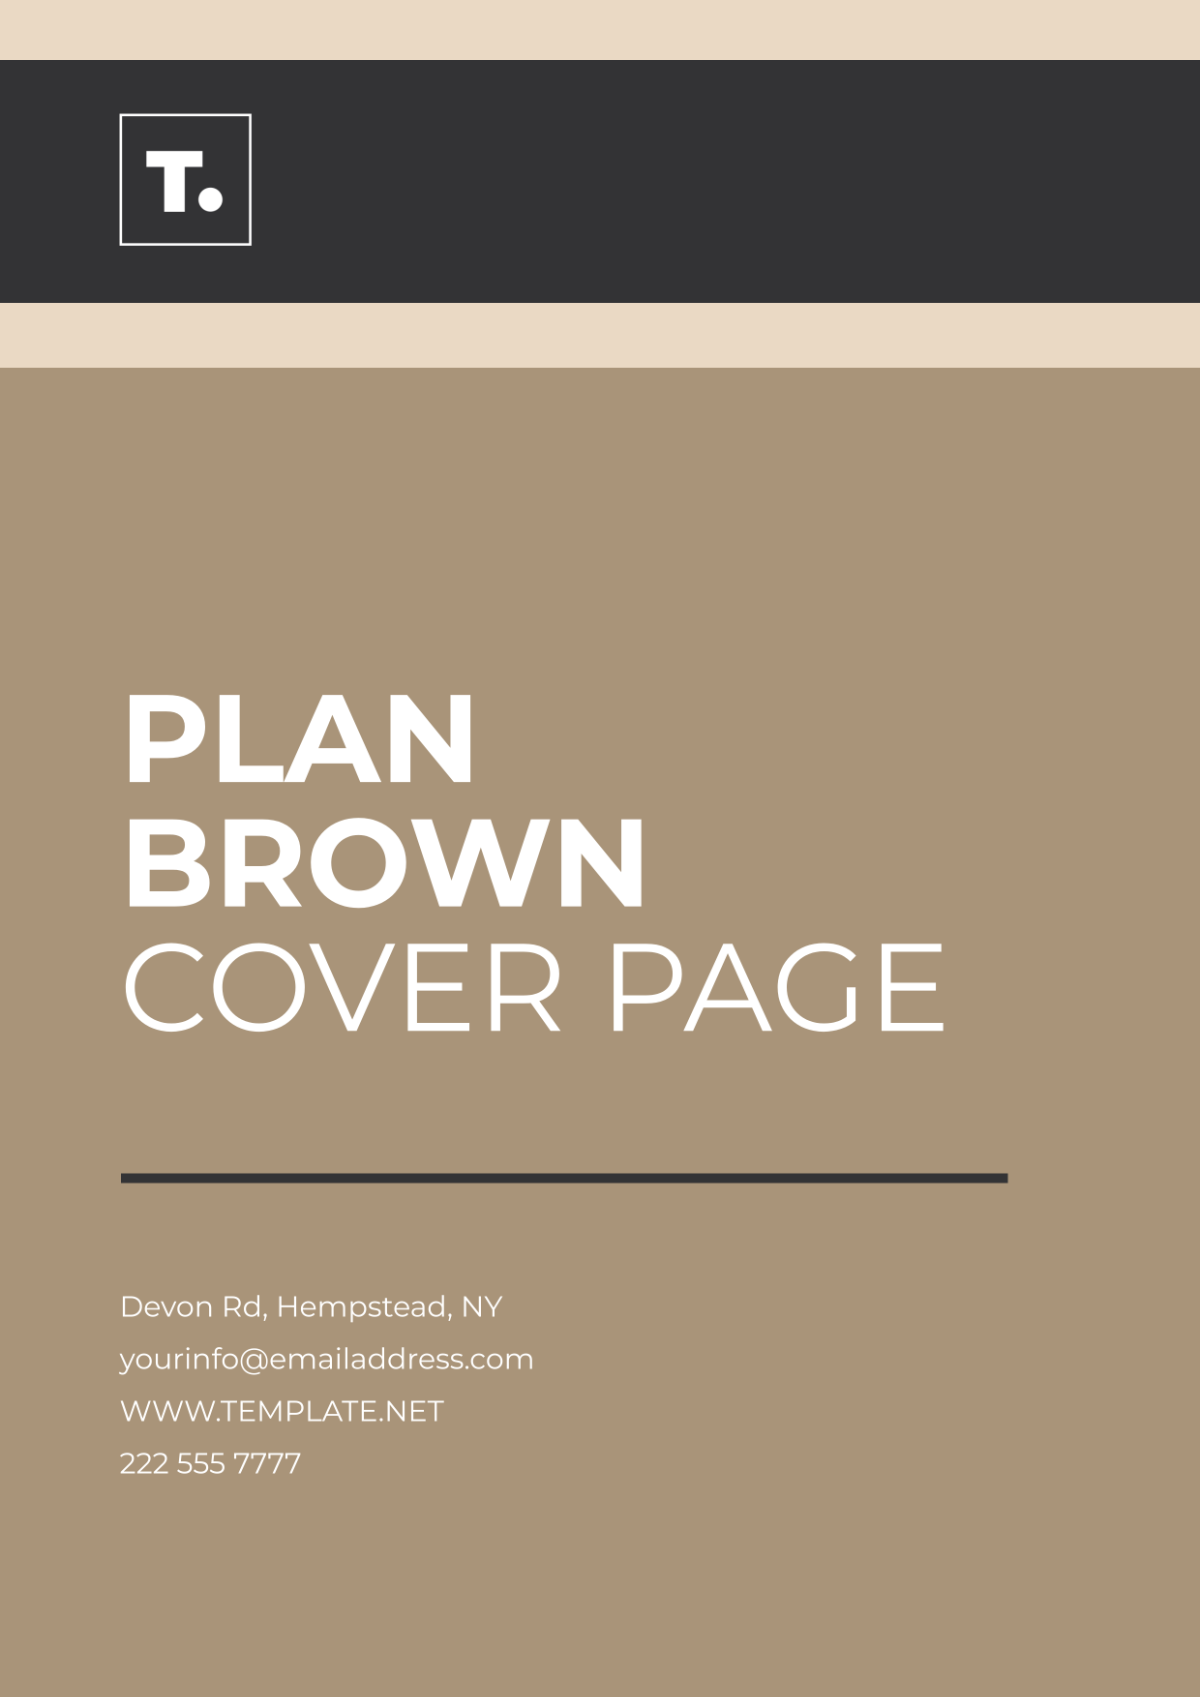 Plan Brown Cover Page